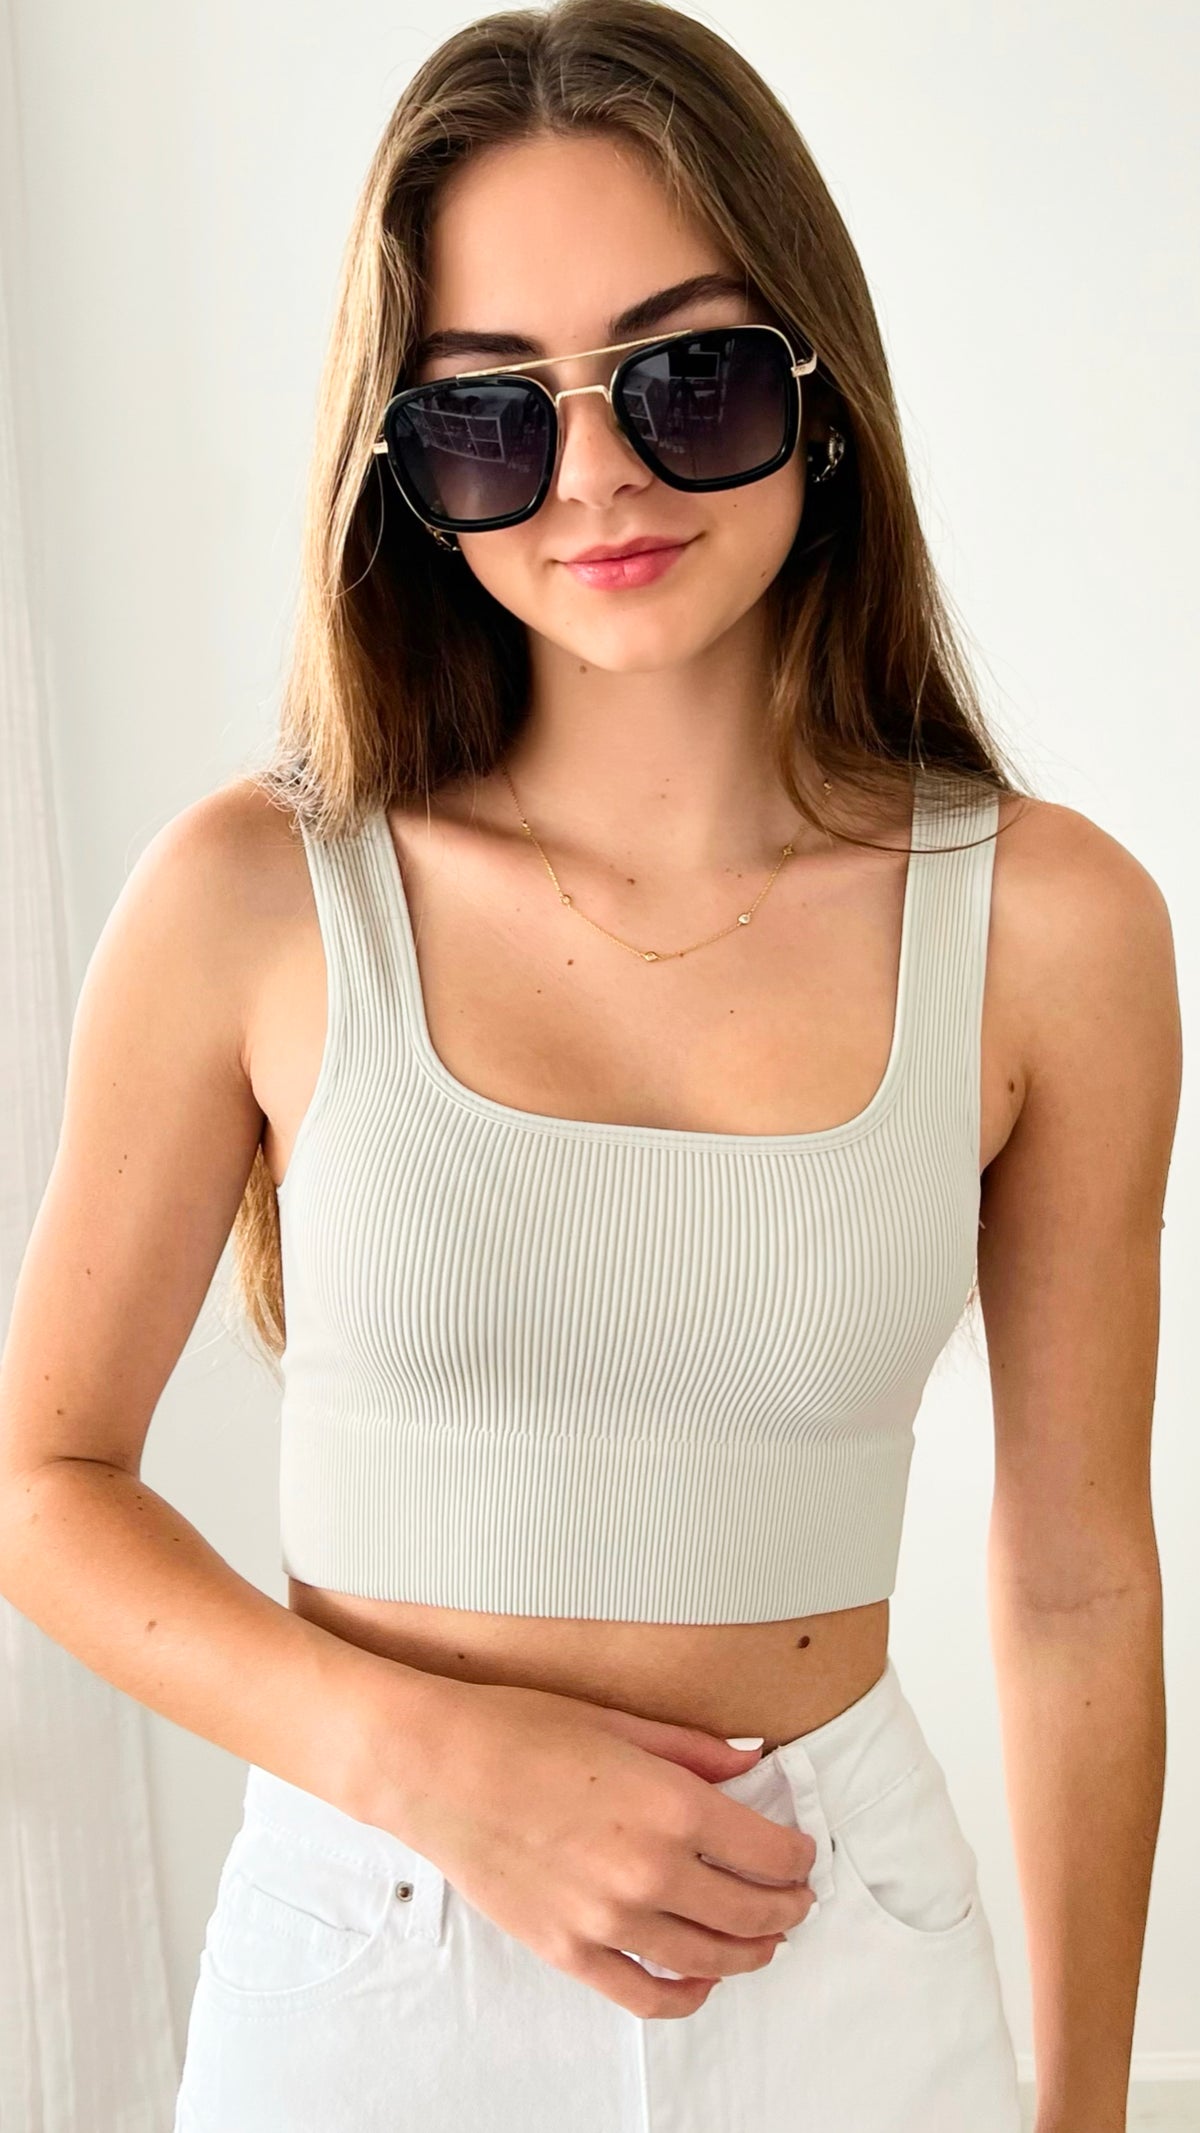 Ribbed Square Neck Cropped Tan Top - Bone-220 Intimates-Zenana-Coastal Bloom Boutique, find the trendiest versions of the popular styles and looks Located in Indialantic, FL